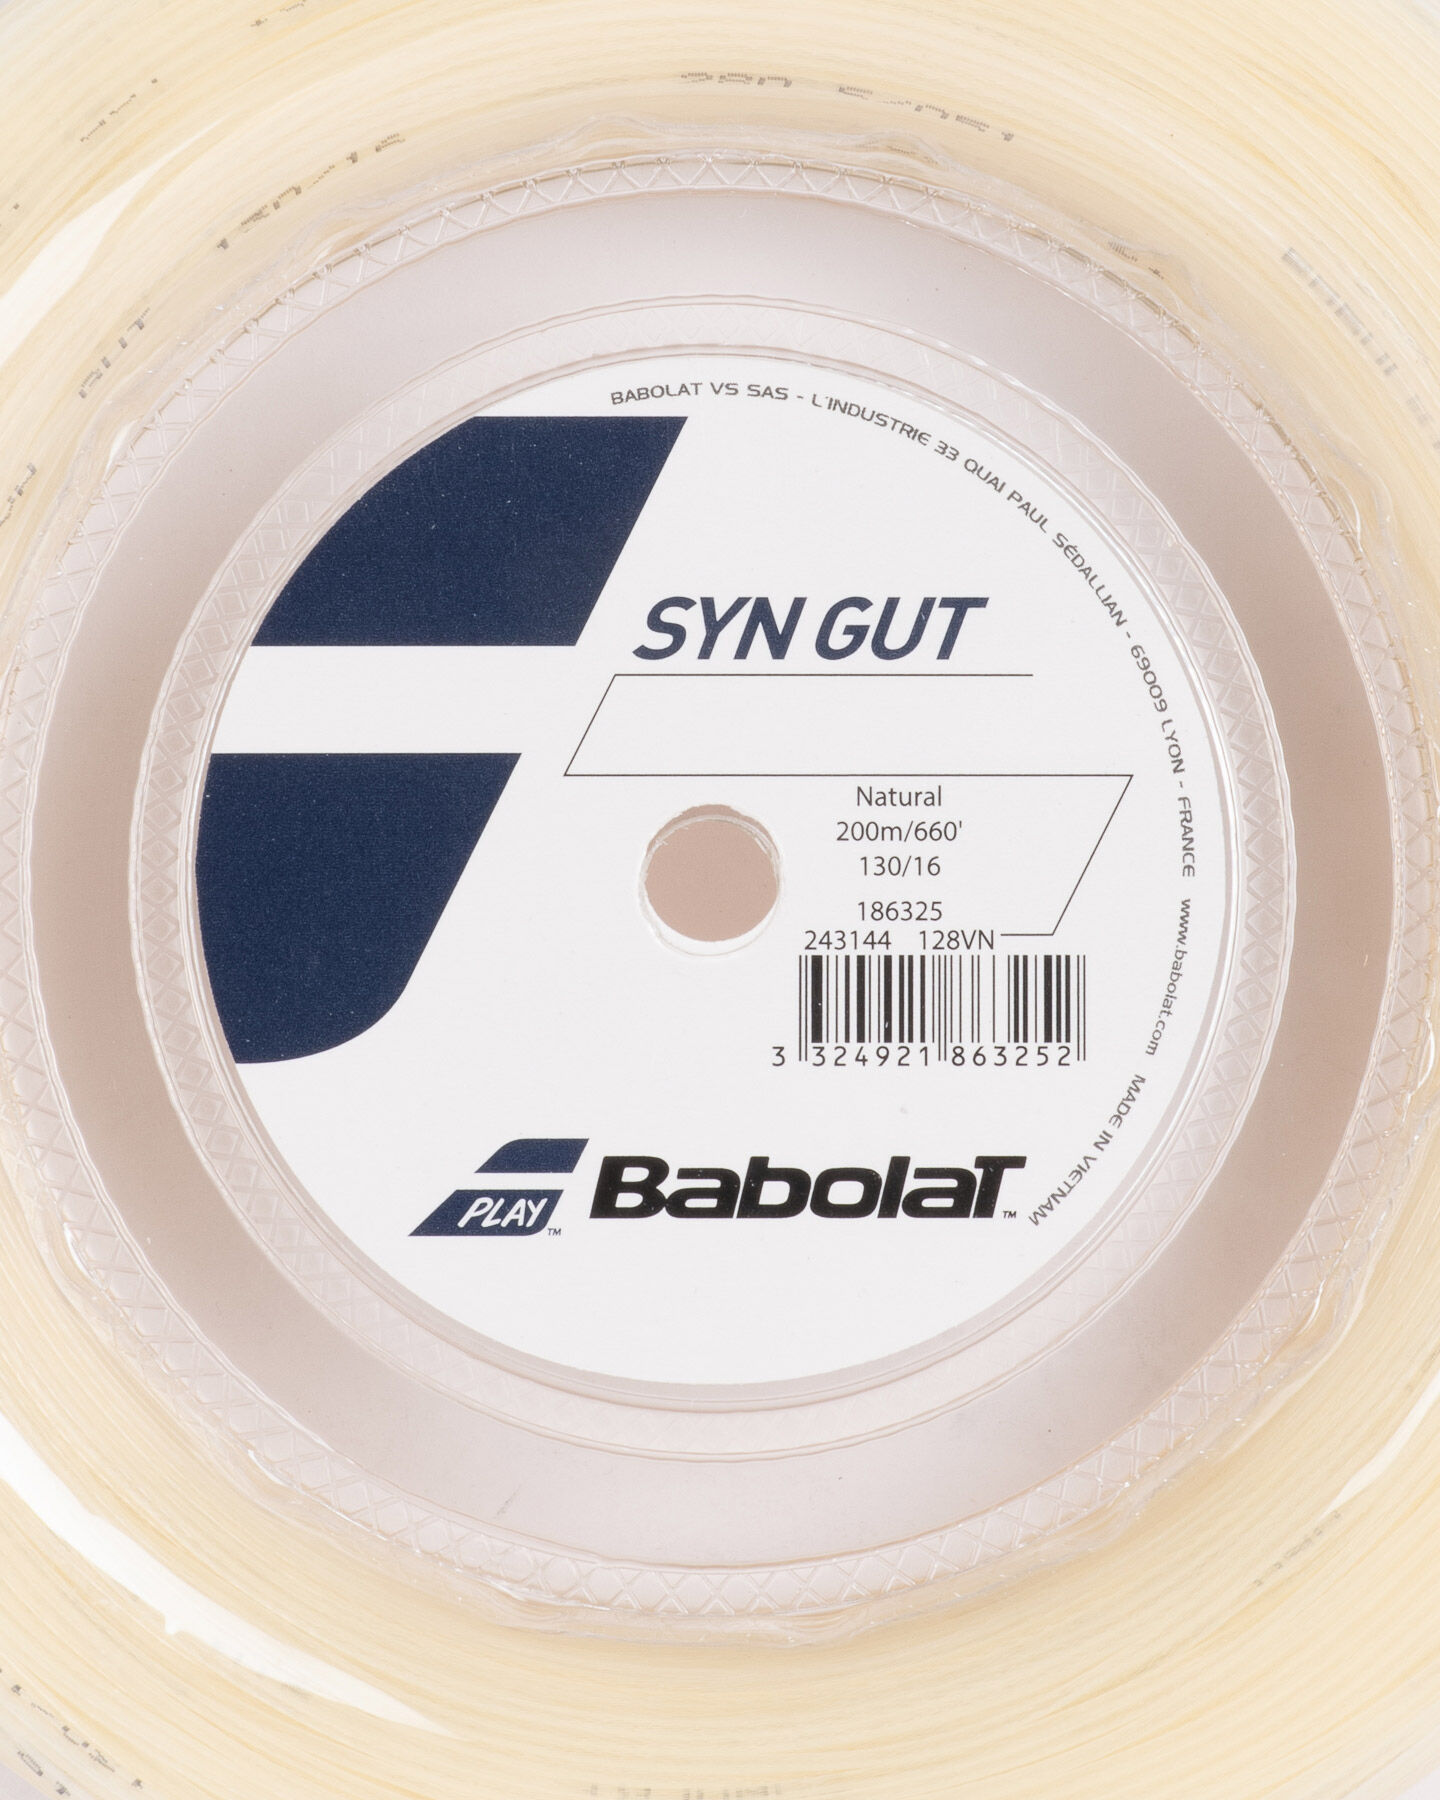  Corde tennis BABOLAT NATURAL SYN GUT 200M  S5314383|128VN|130 scatto 1